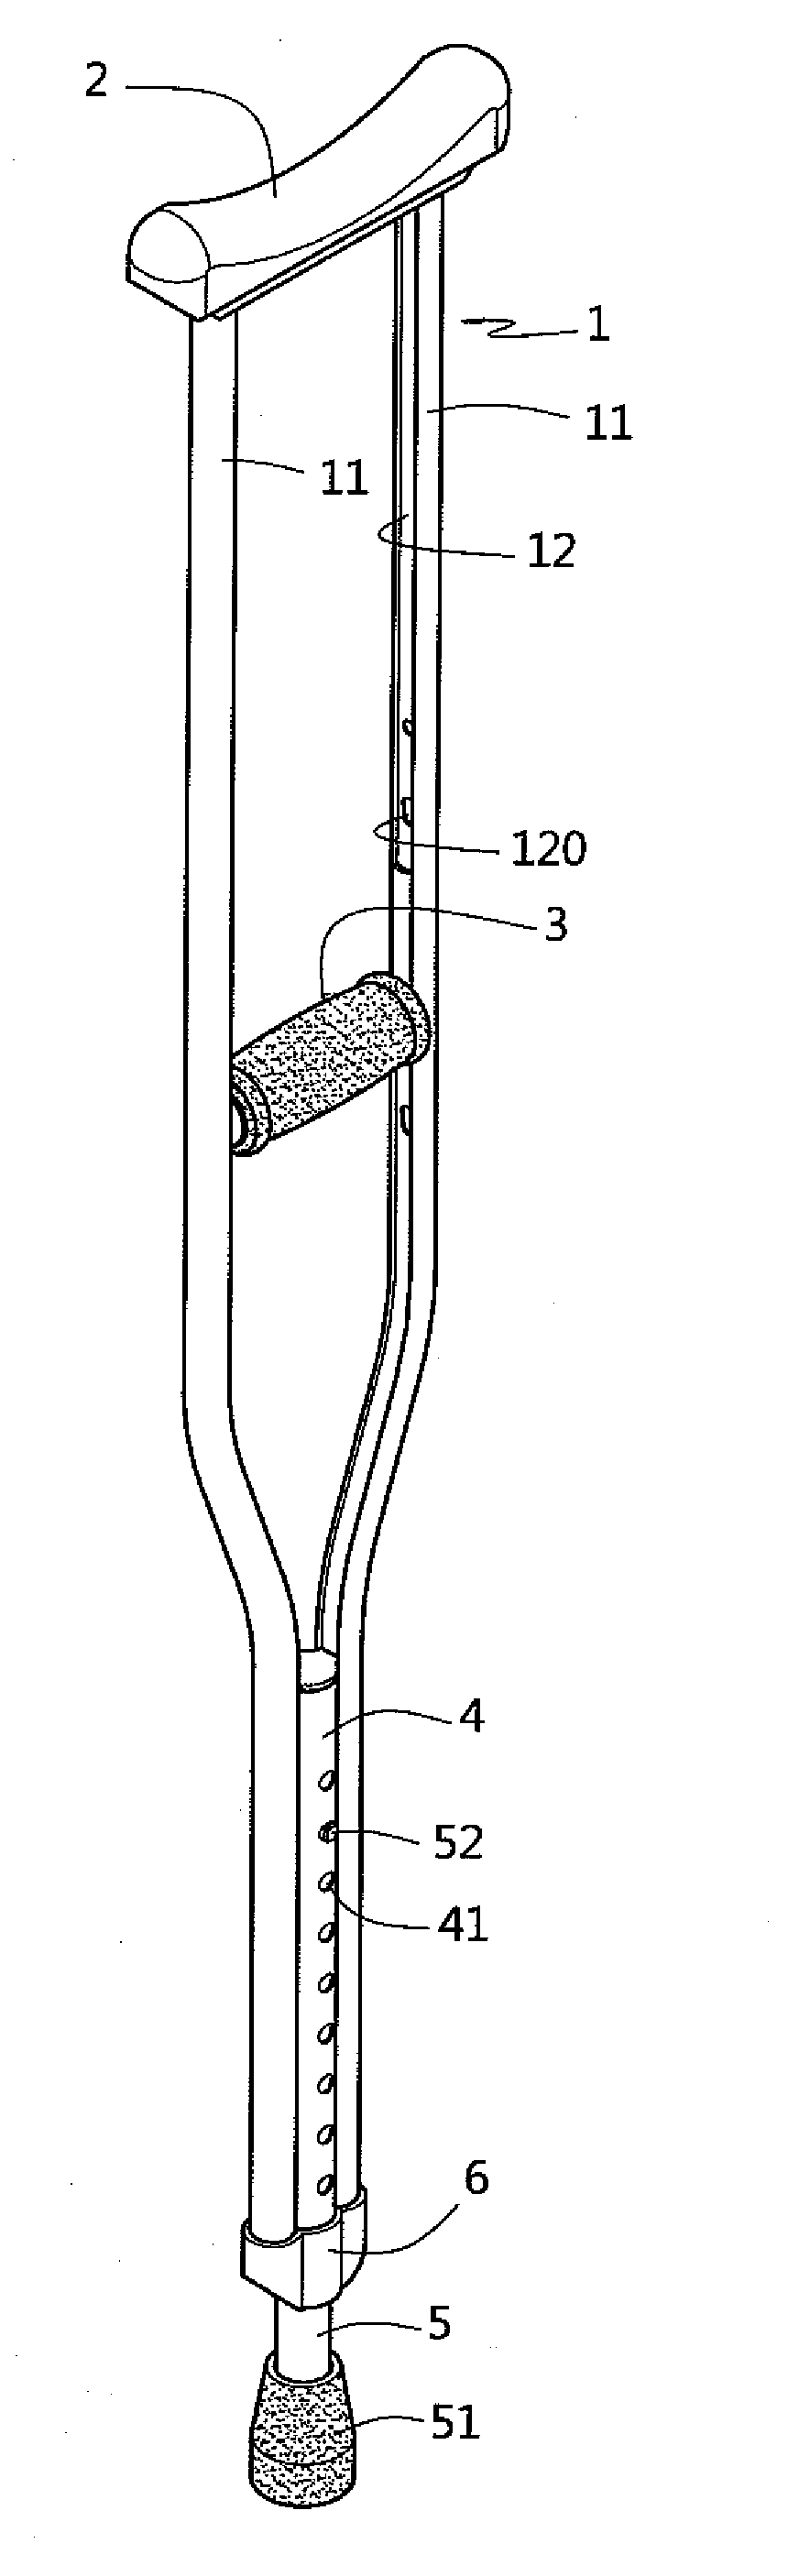 Reinforced axillary crutch with adjustable handgrip